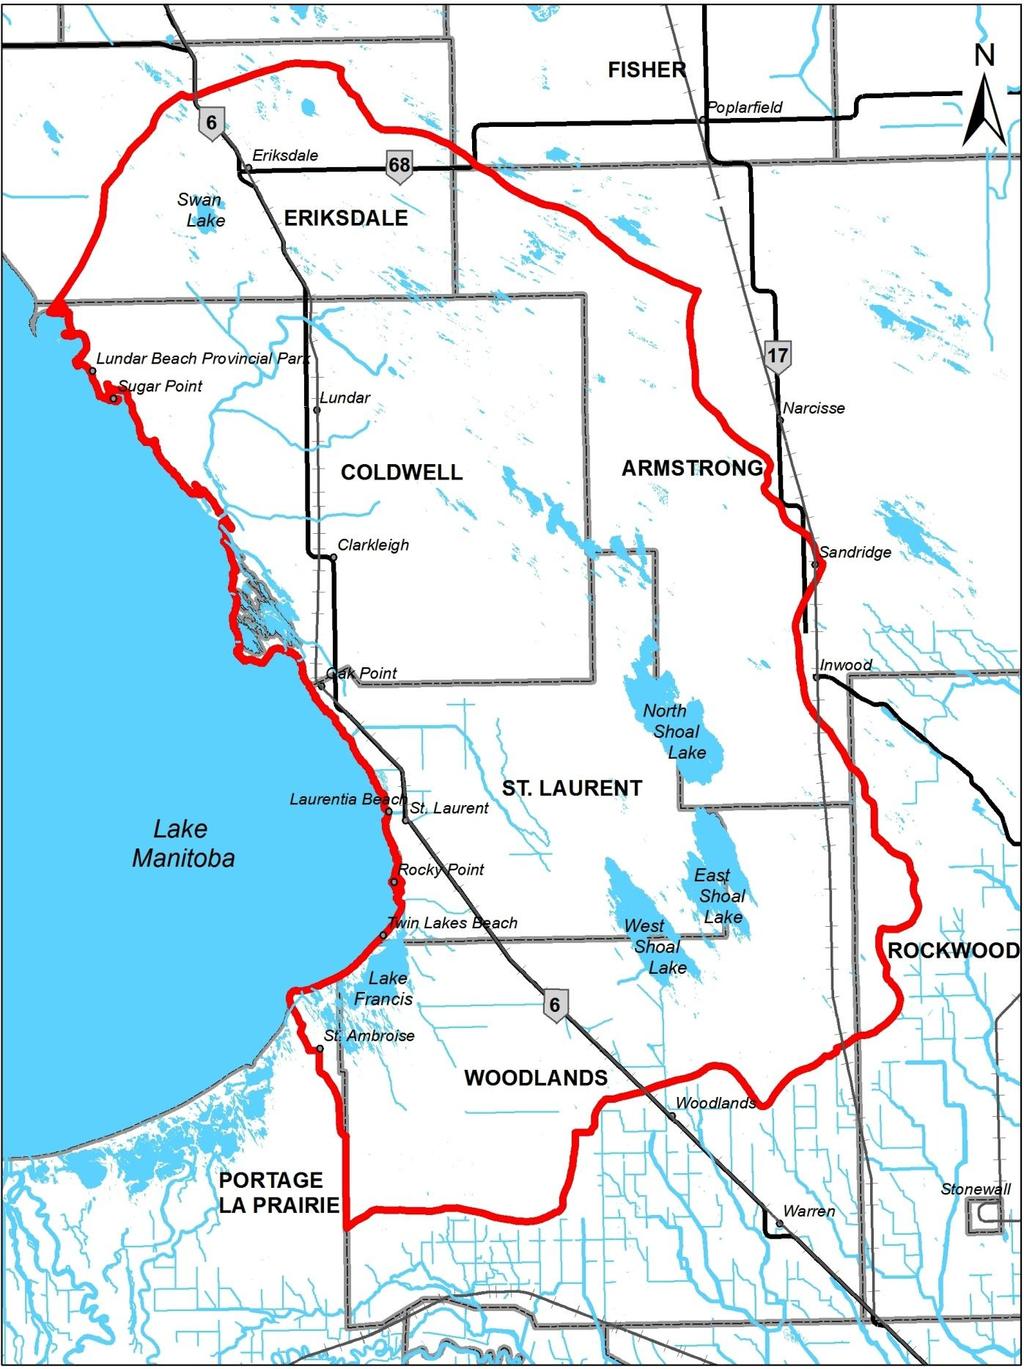 FIGURE 1 Watershed Planning Area for the Southwest Interlake Integrated Watershed